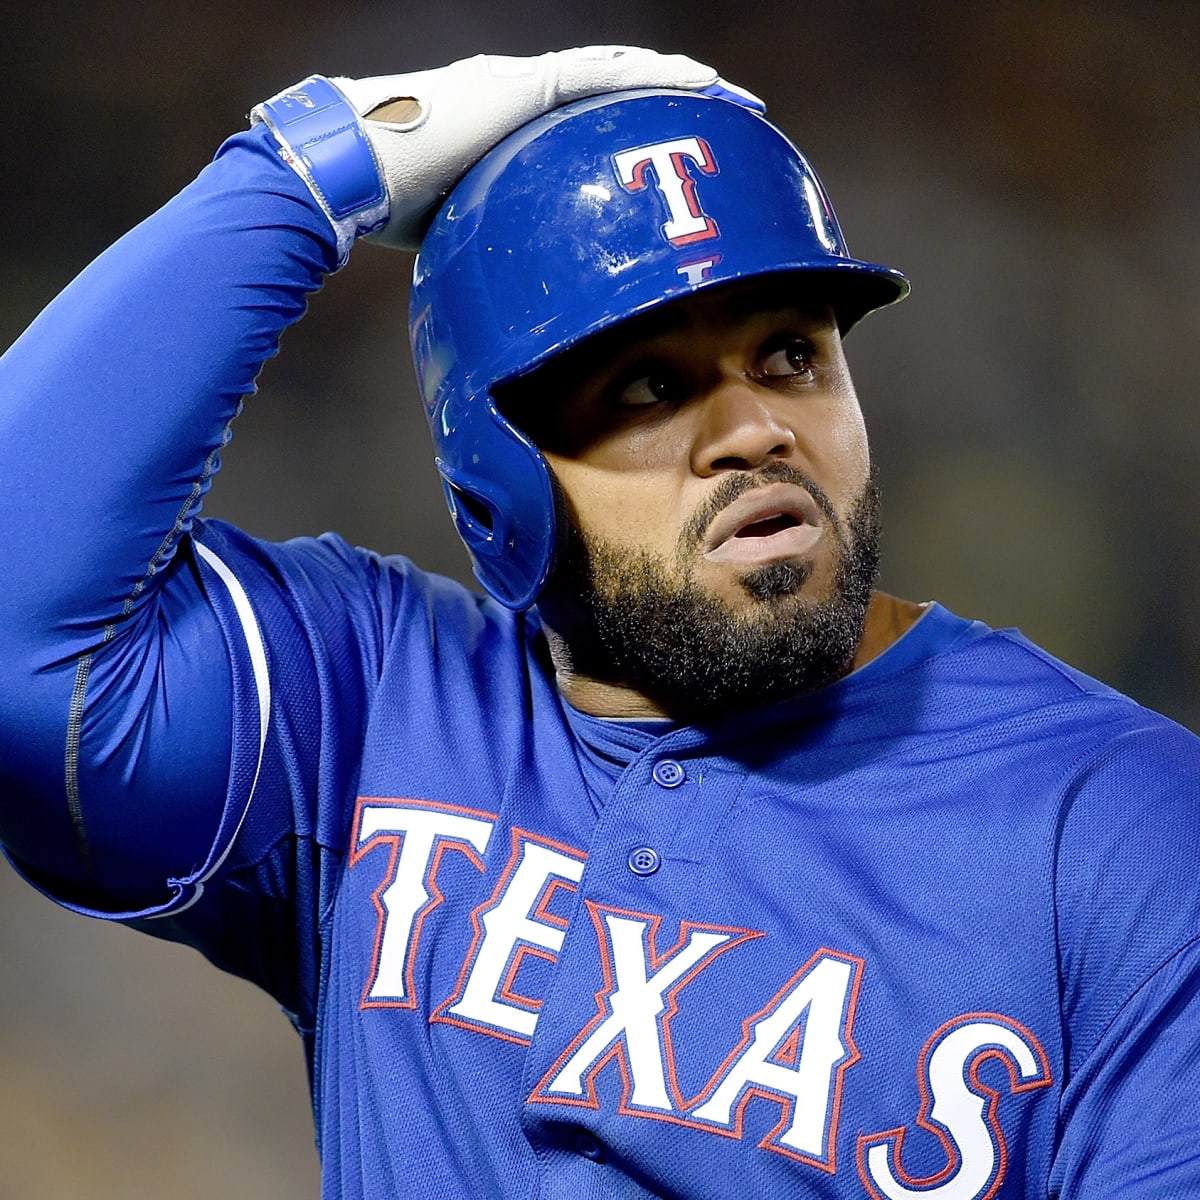 Prince Fielder's Early Struggles May Be a Sign of Things to Come